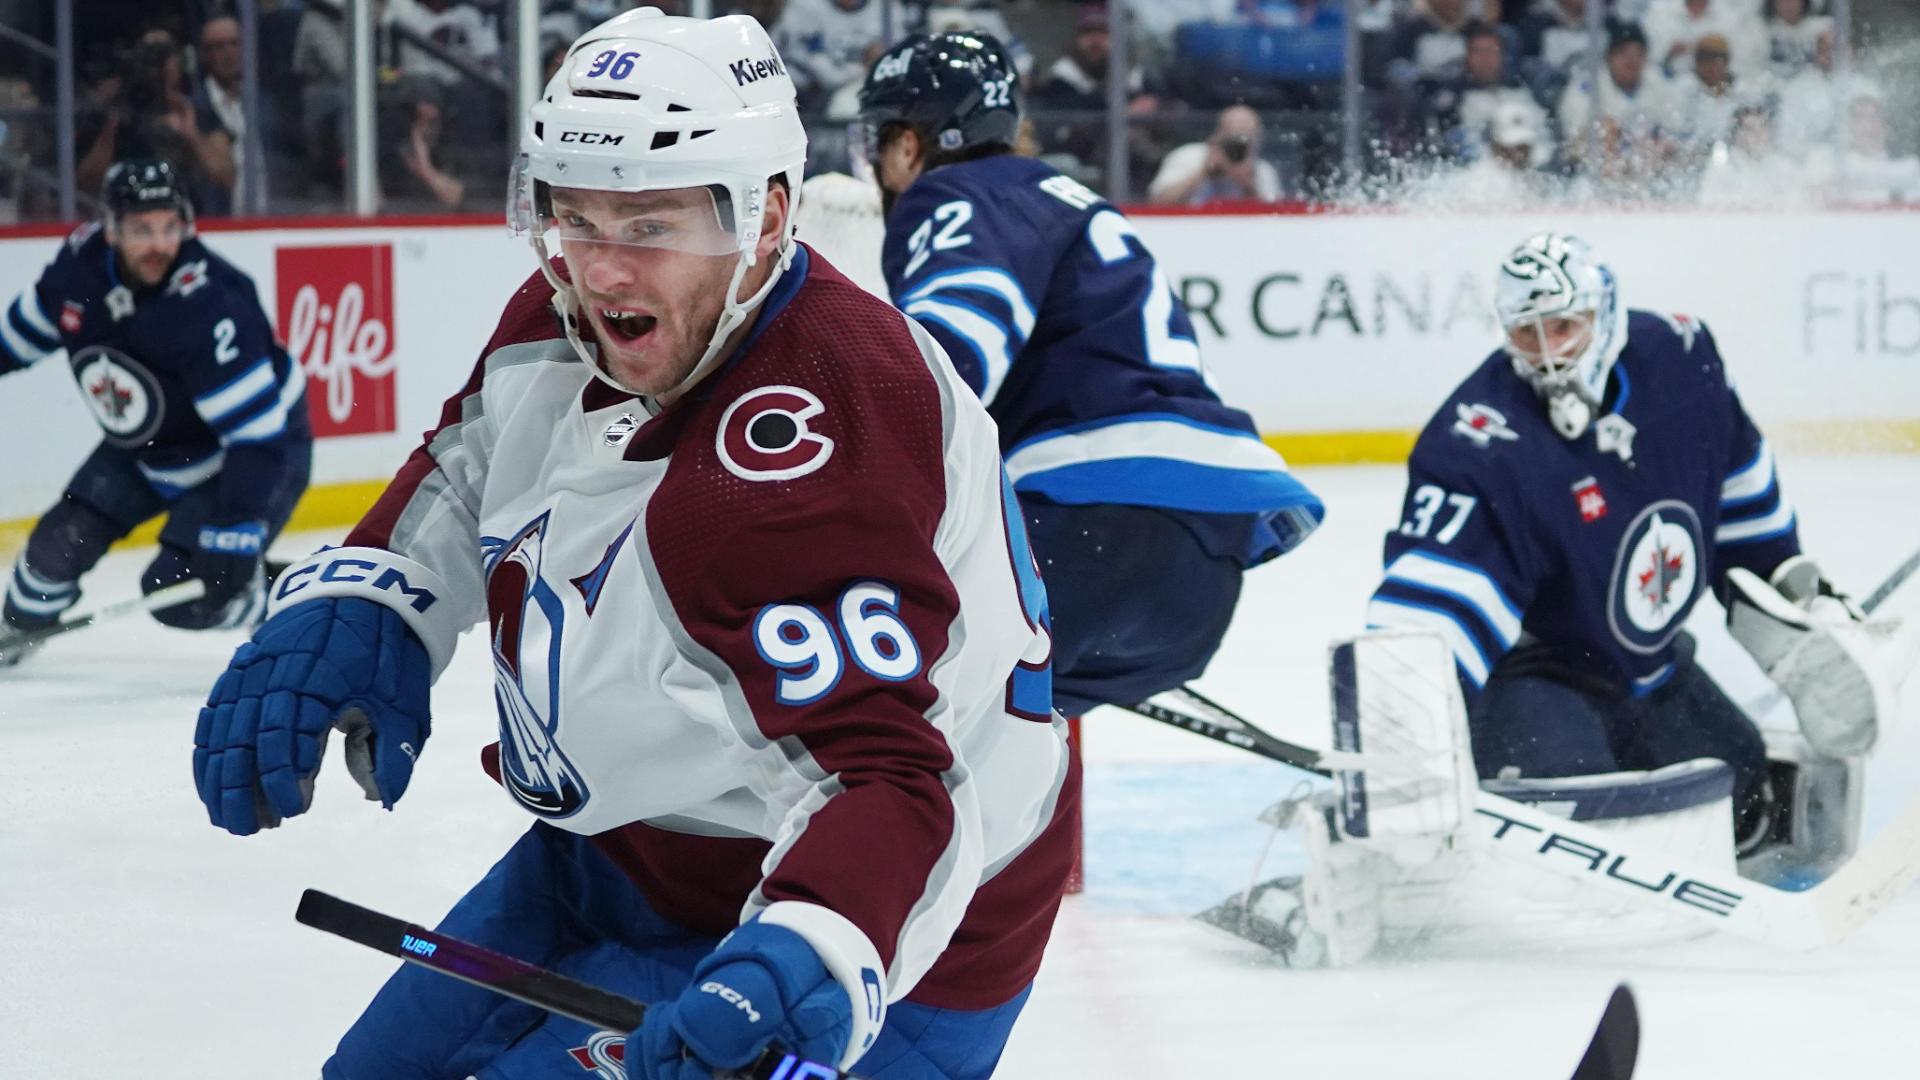 Rantanen scores twice in the 3rd period to lead Avalanche past Jets 6-3 and into the 2nd round